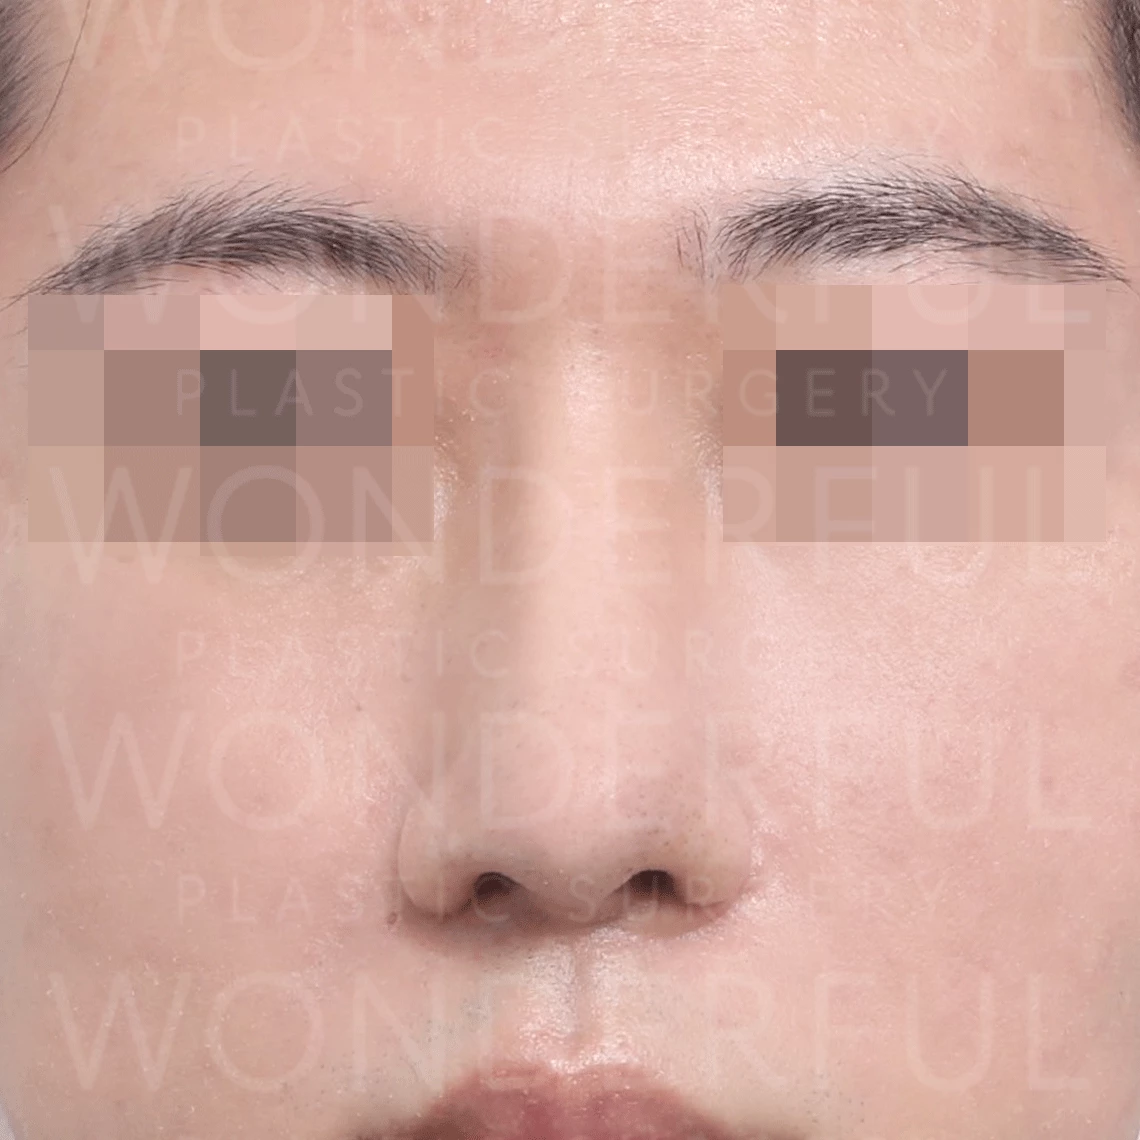 wonderful-plastic-surgery-hospital-korea-wide-nose-rhinoplasty-before-after-results-after-1